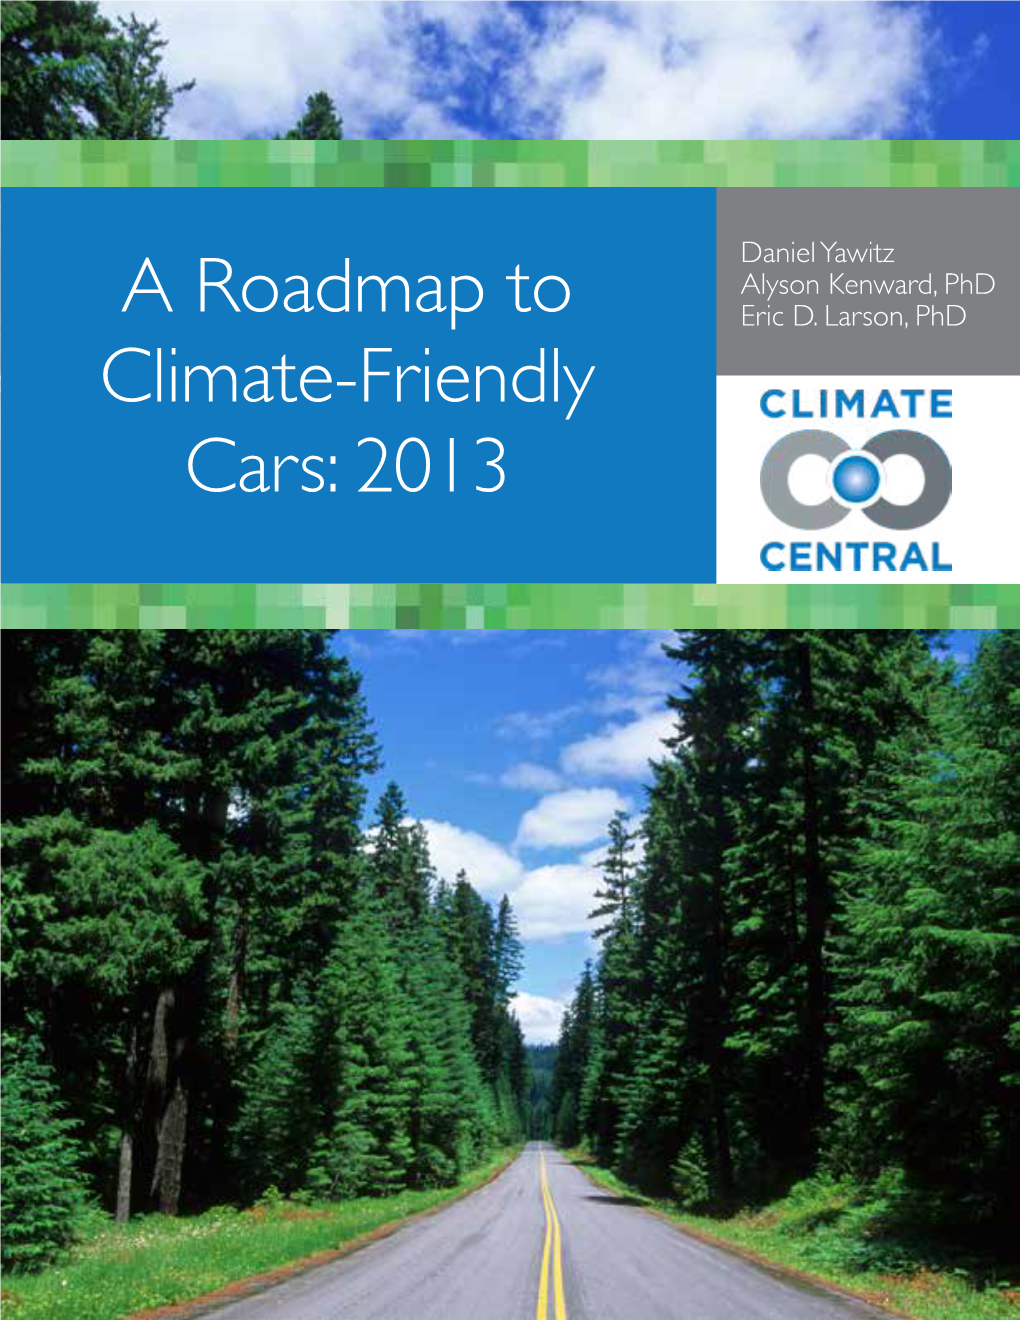 A Roadmap to Climate-Friendly Cars: 2013